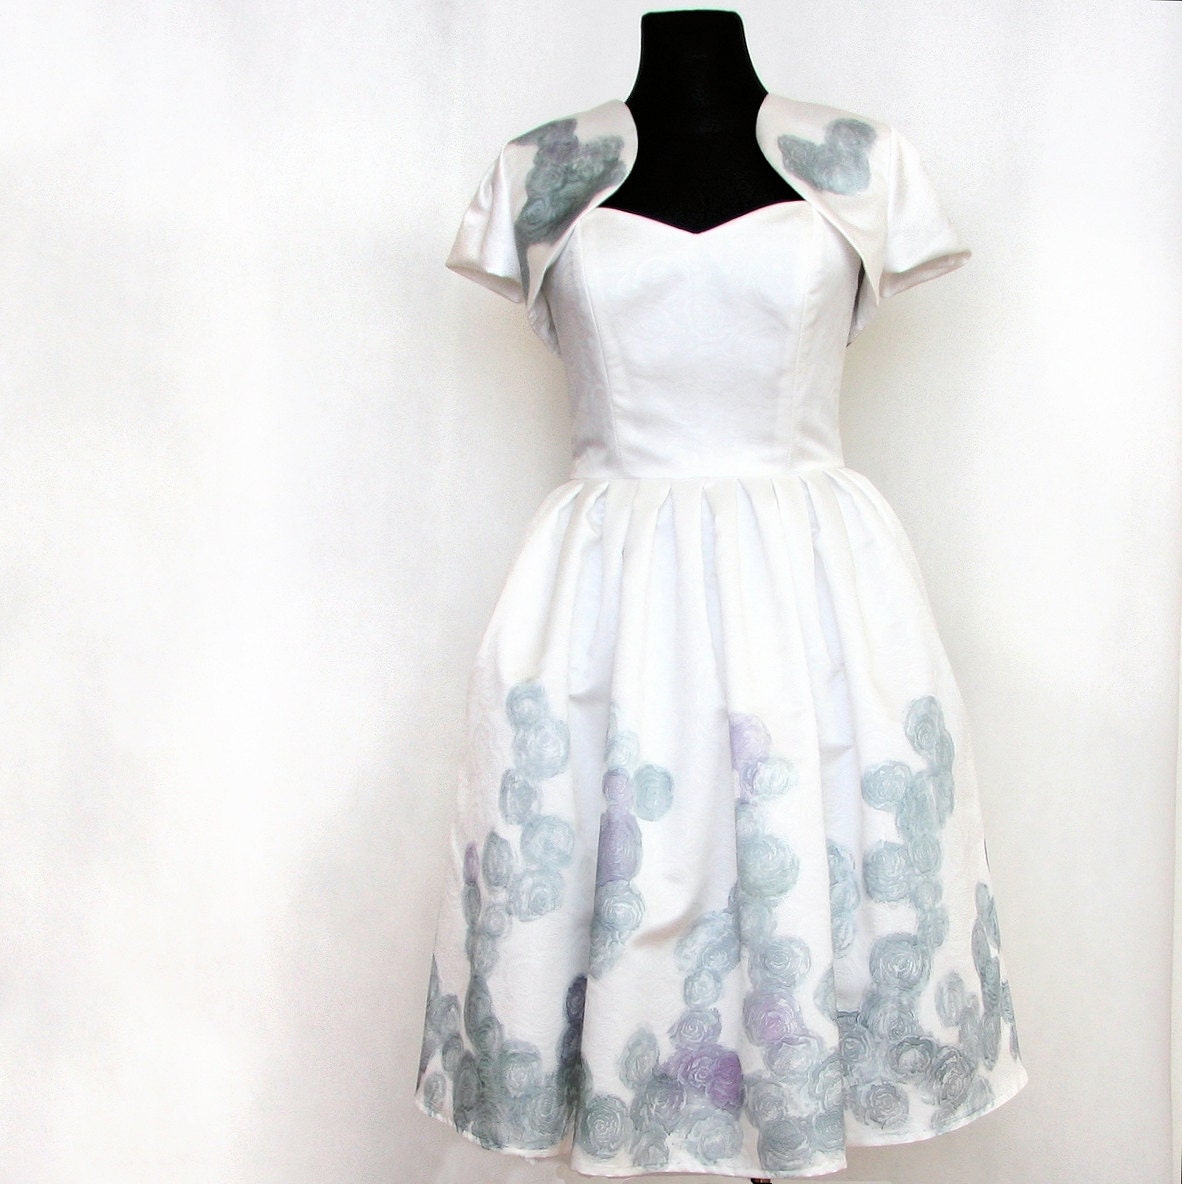 Hand-painted dress with satin embossed with flowers in retro style - DorSilk